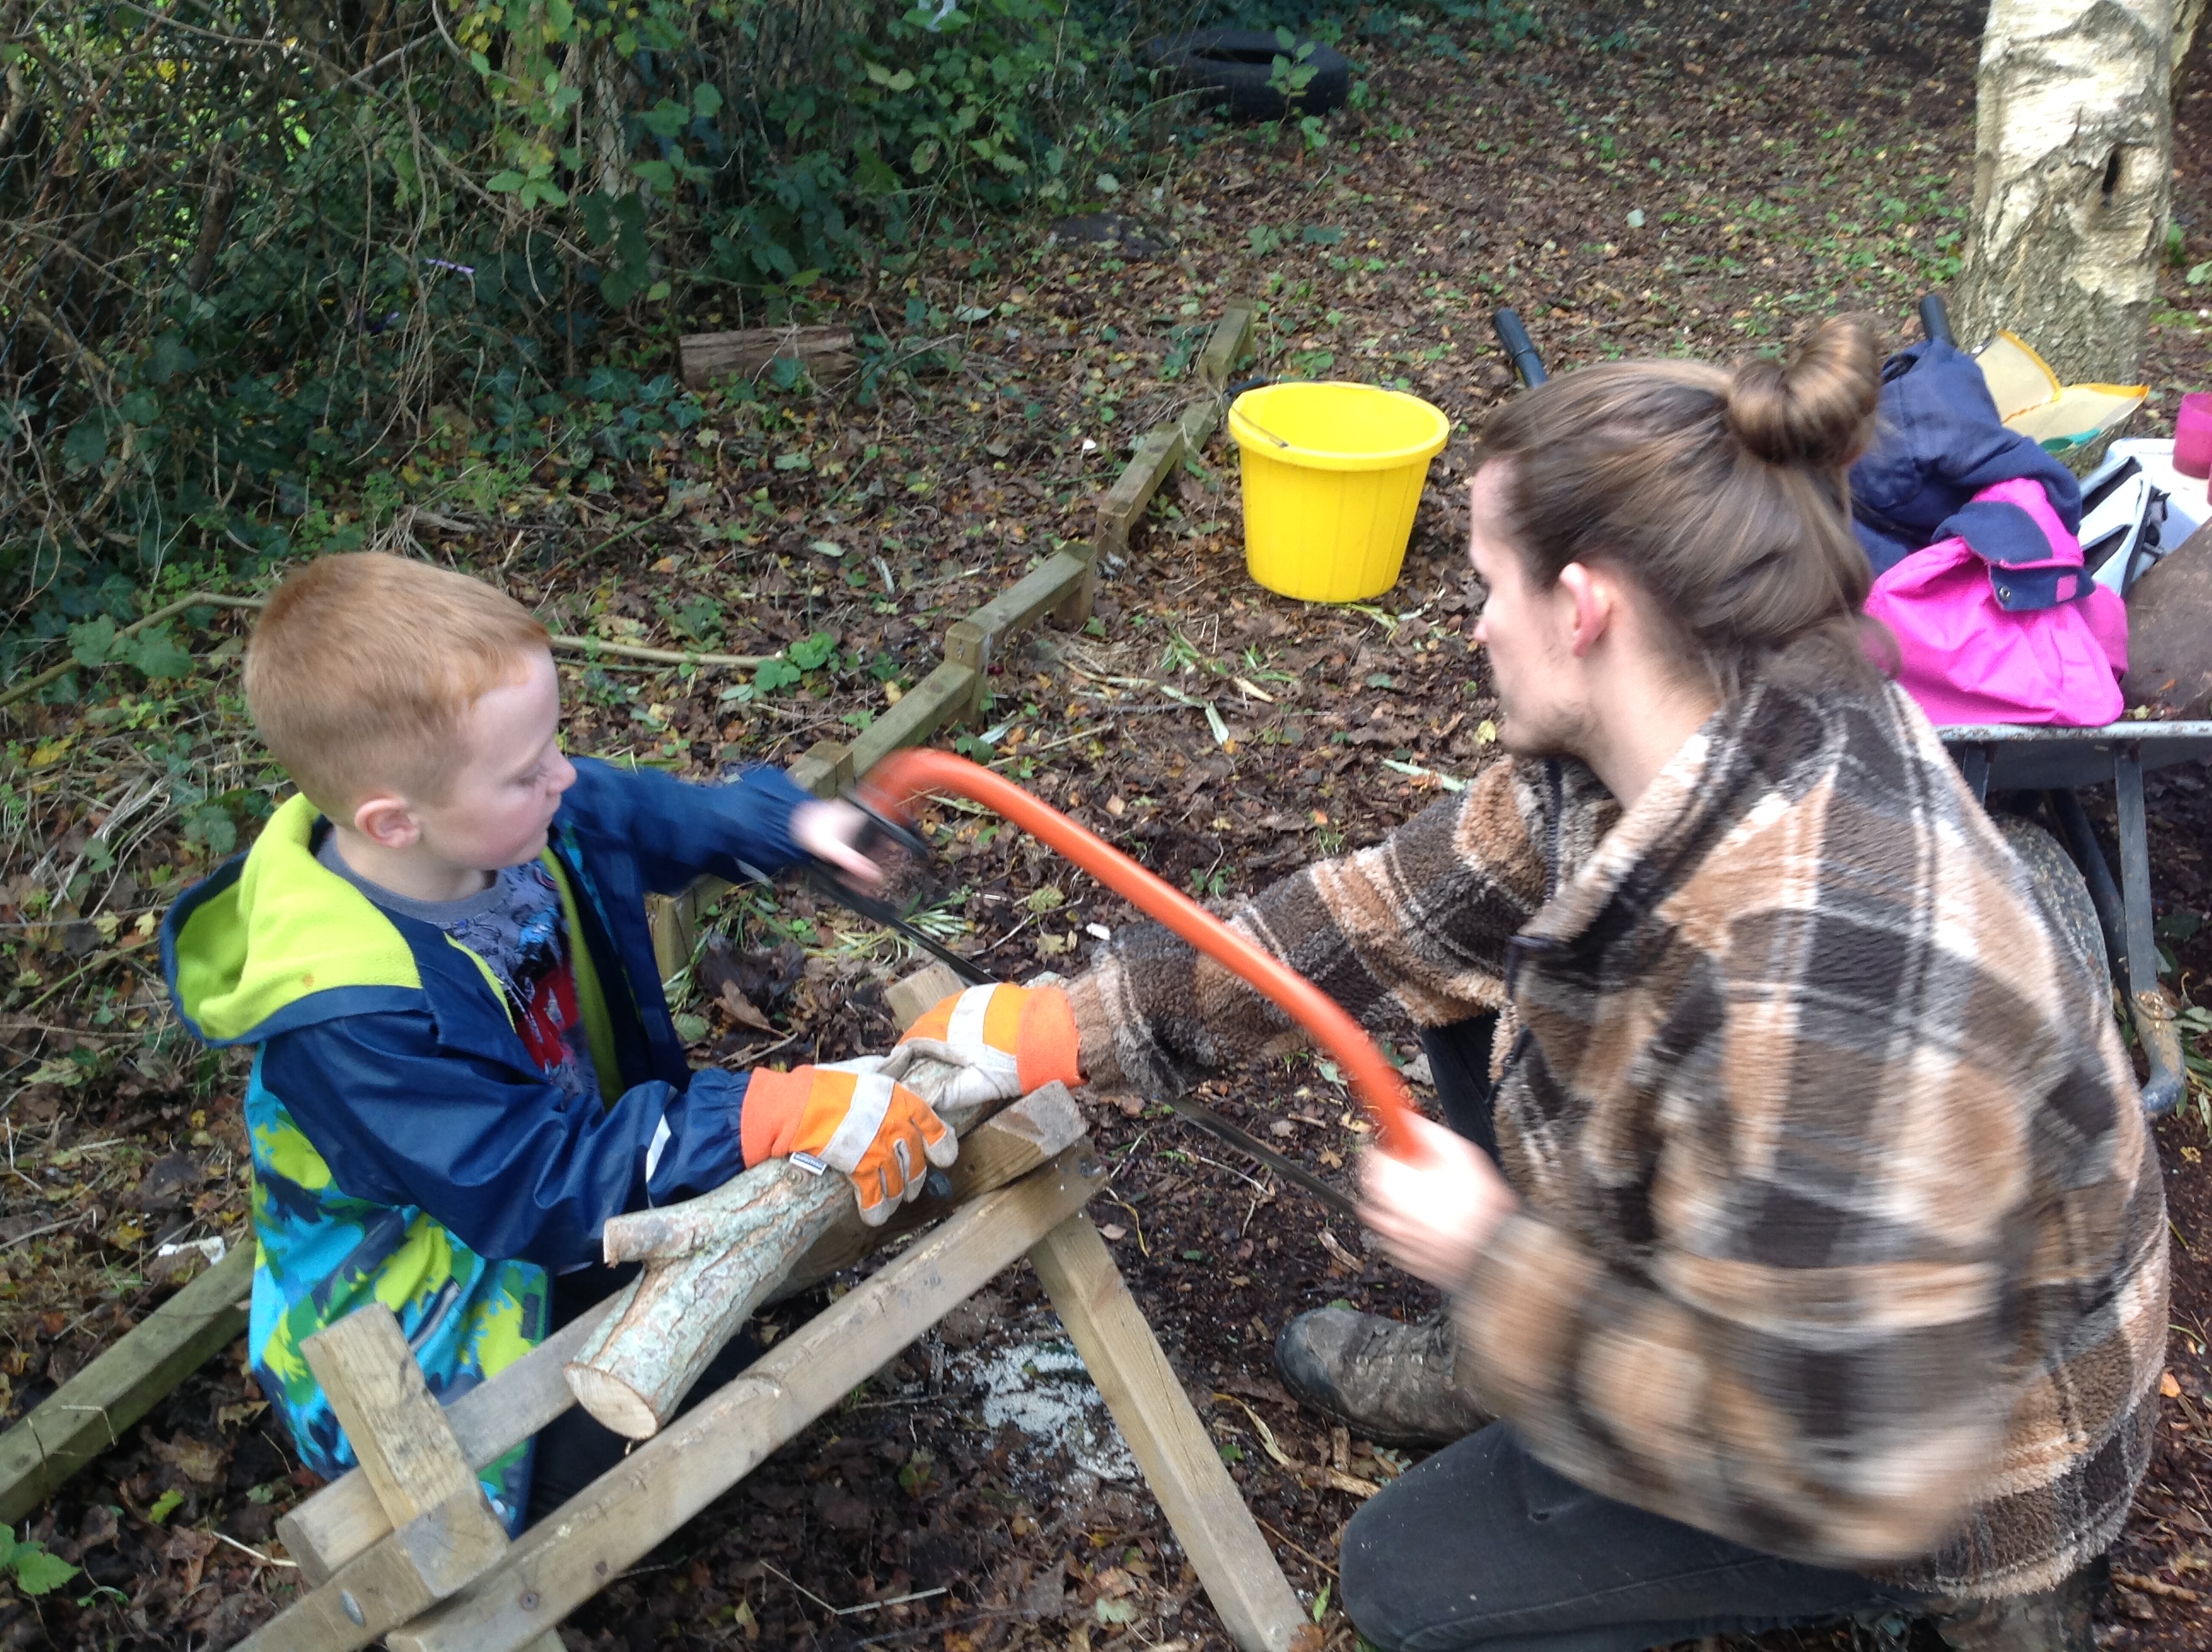 A child is learning to use tools safely.